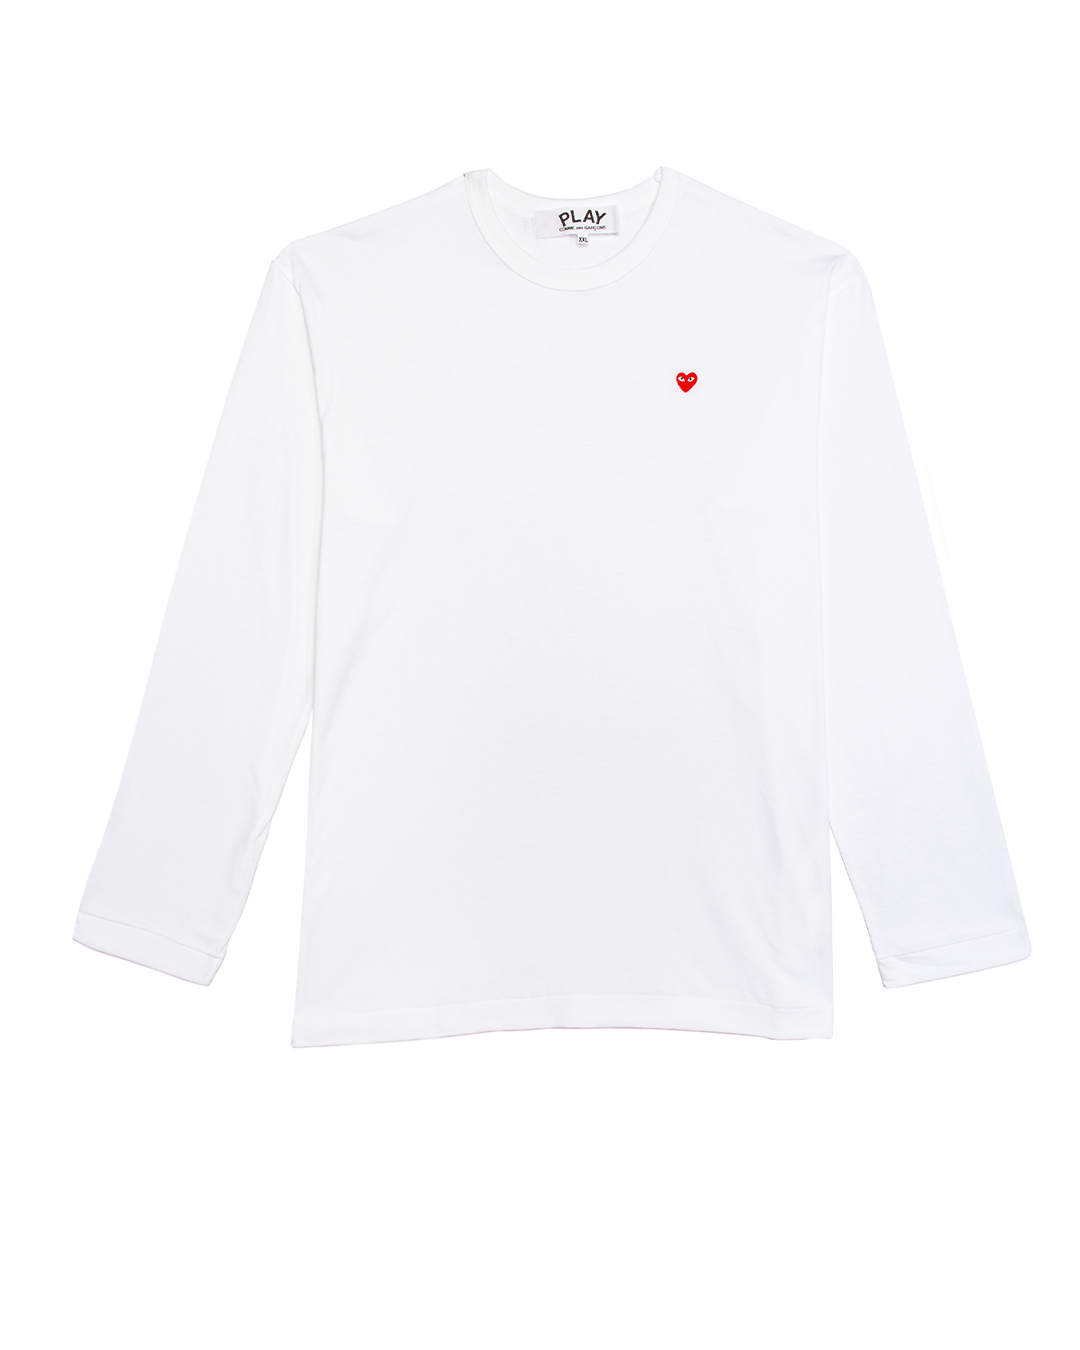 Small Red Heart Long Sleeve T-shirt